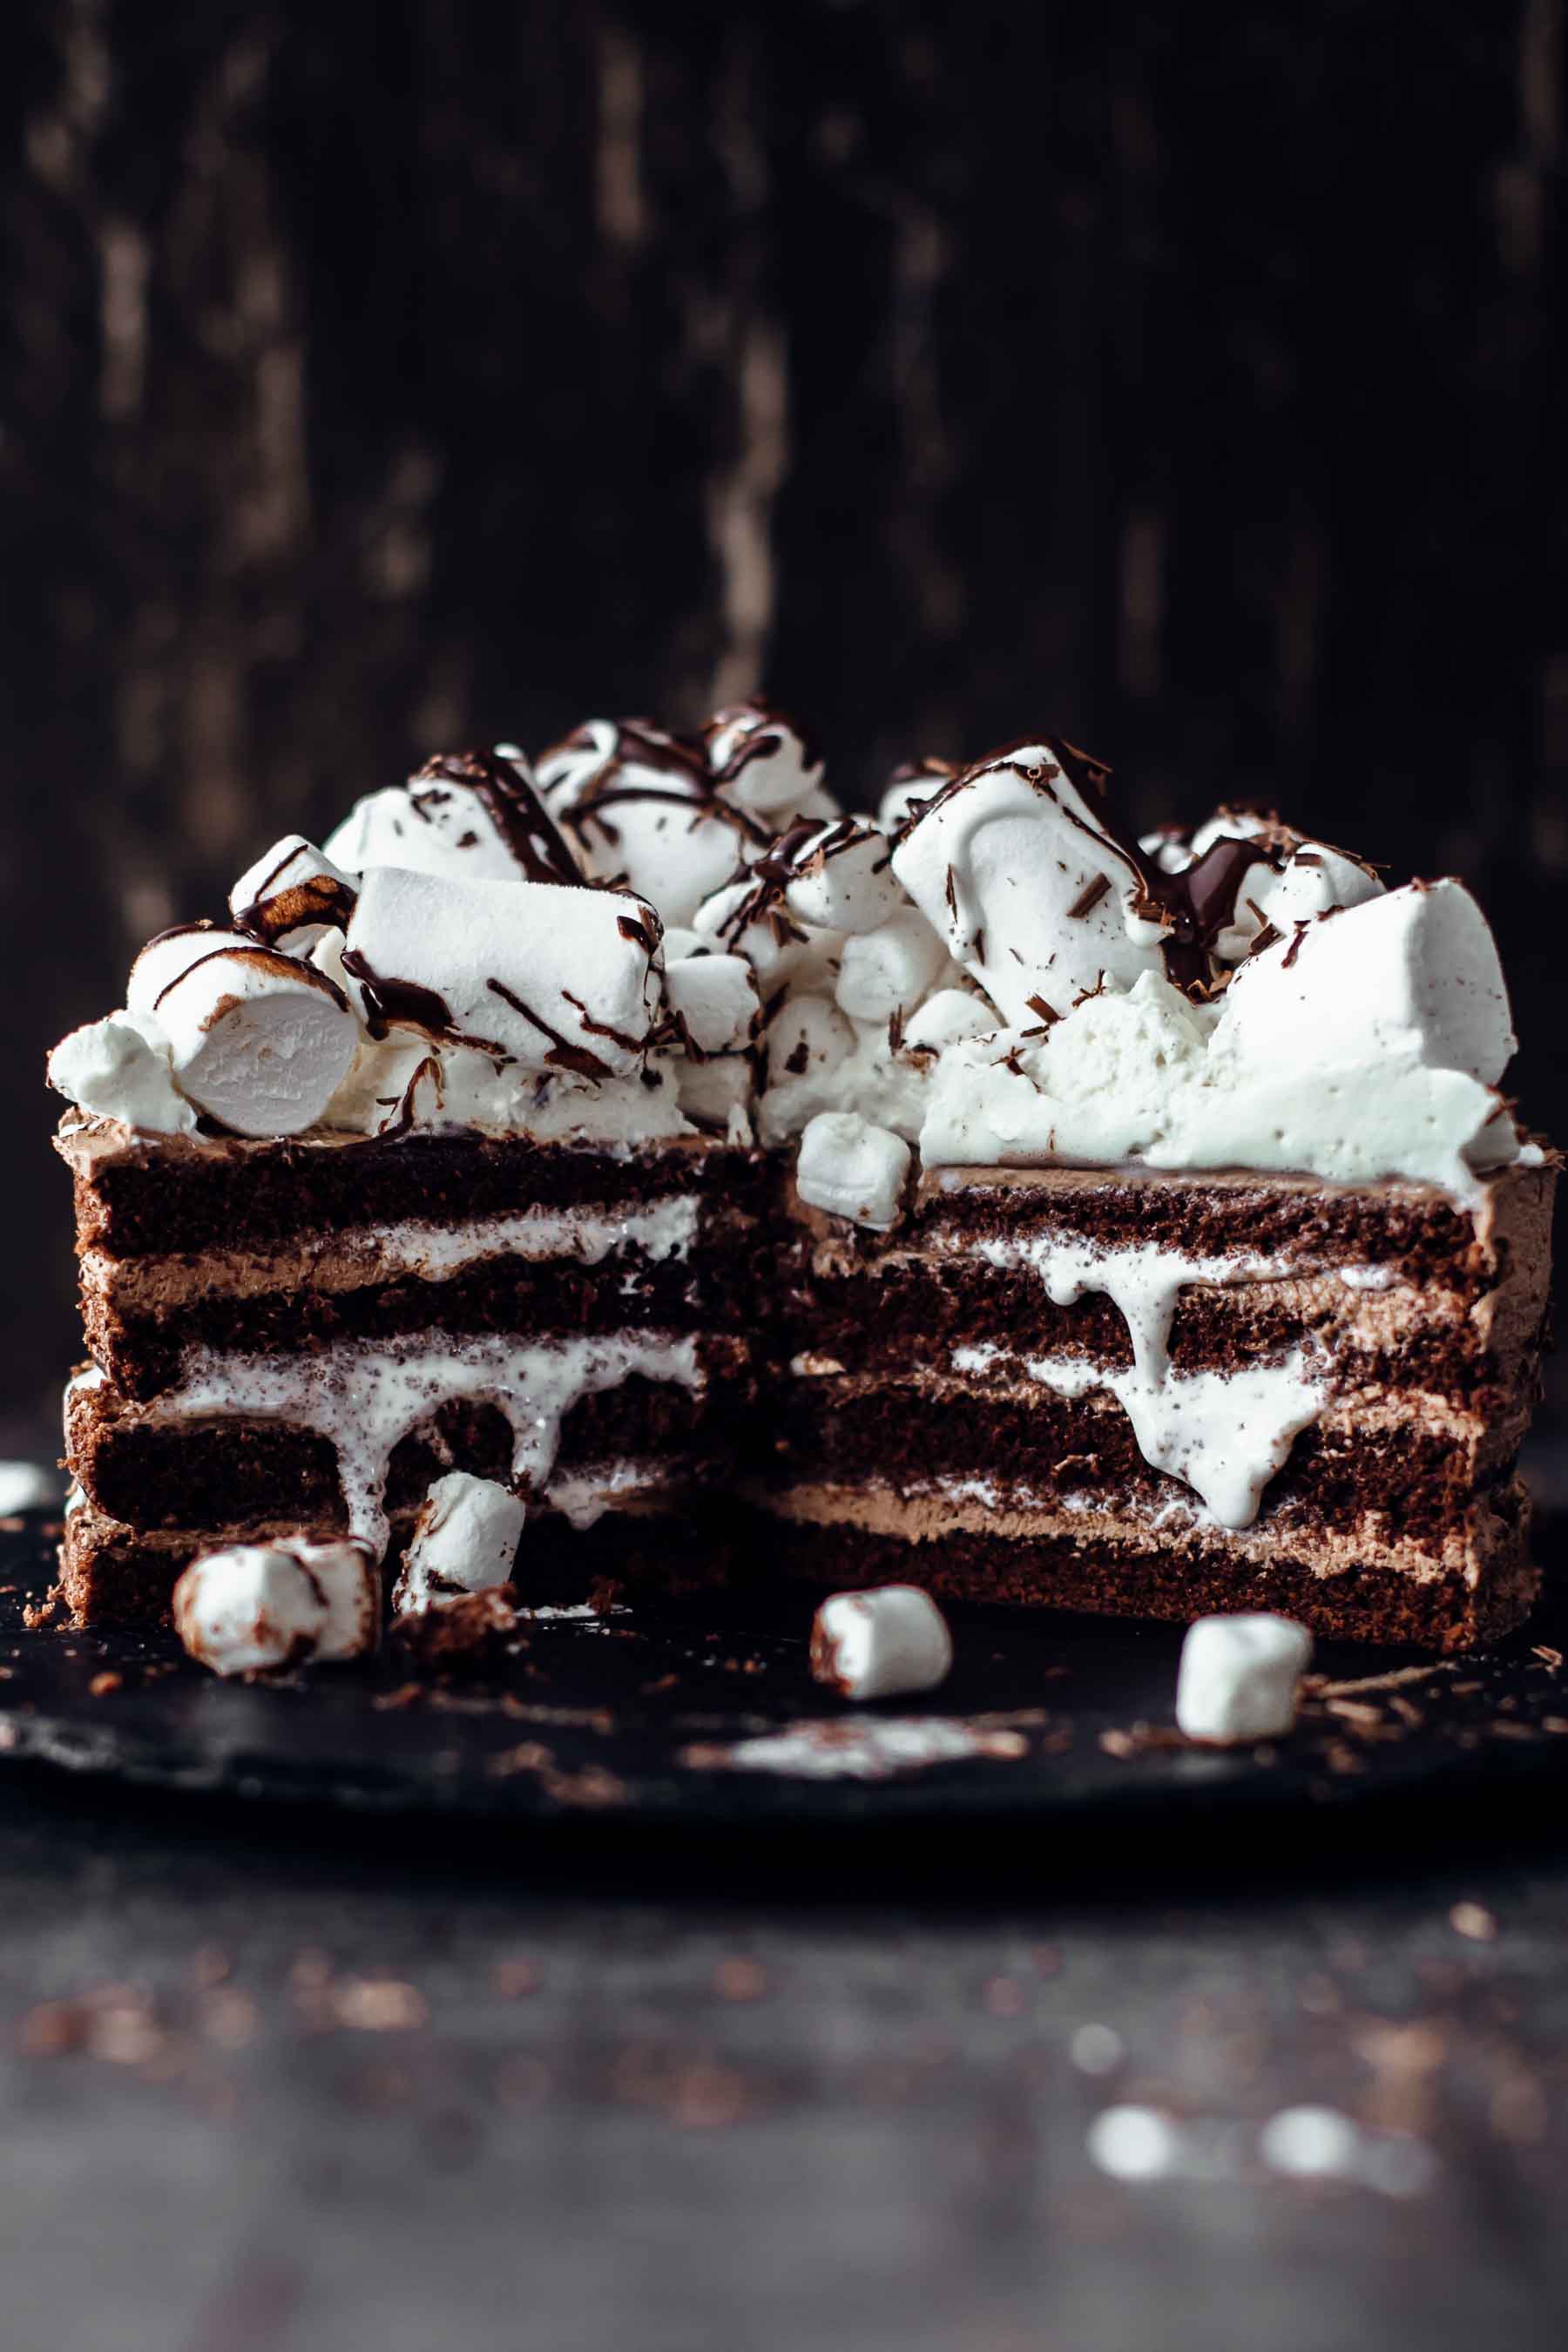 Hot Chocolate Cake Recipe - Also The Crumbs Please